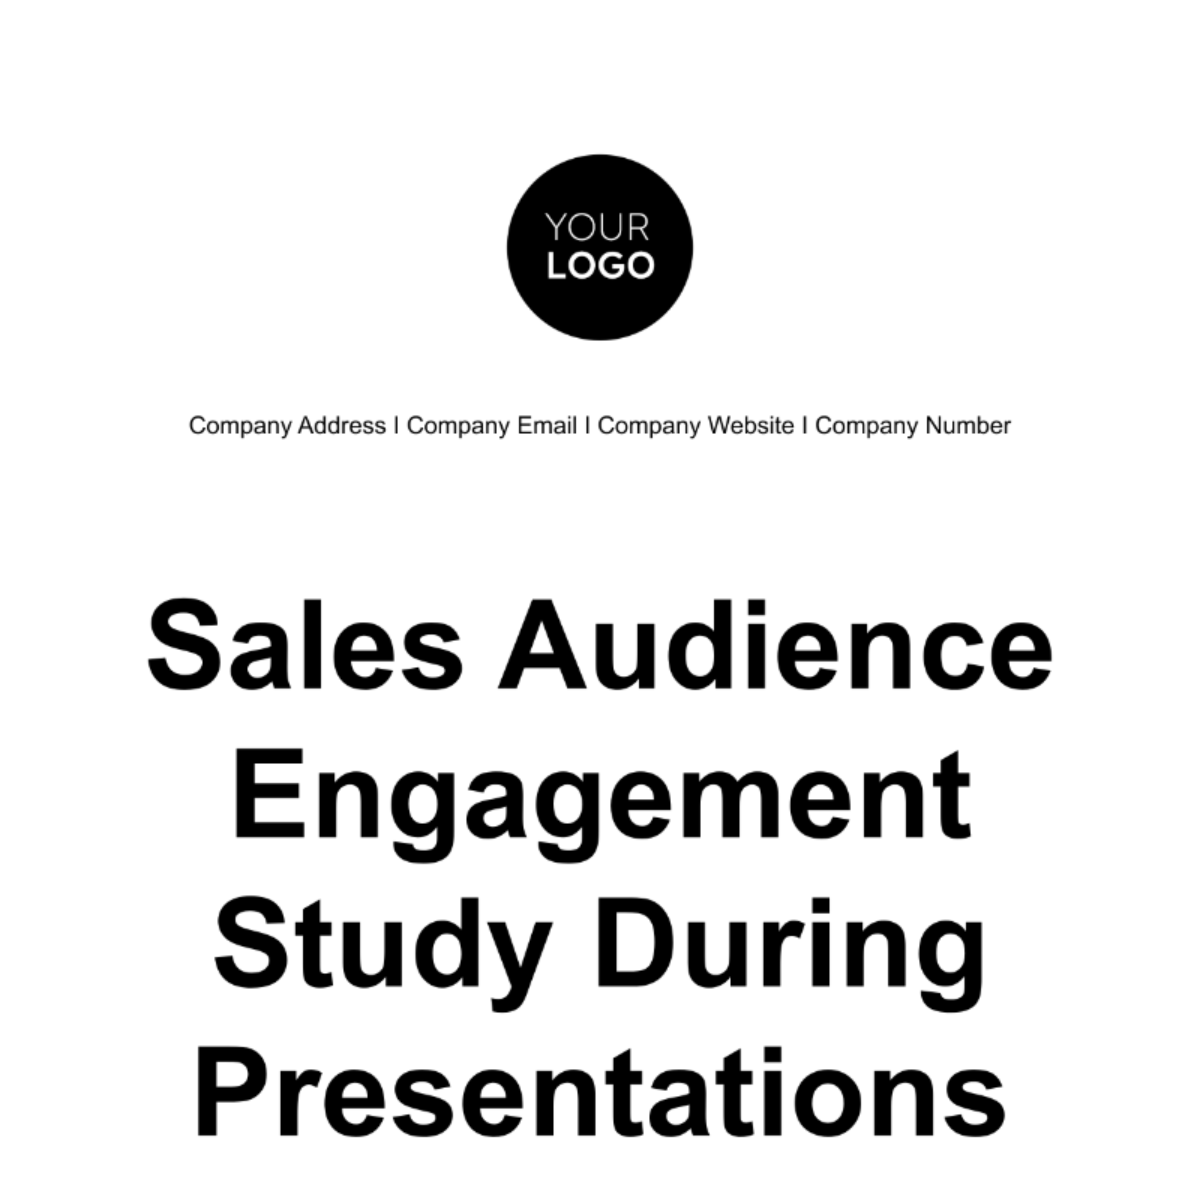 Free Sales Audience Engagement Study during Presentations Template